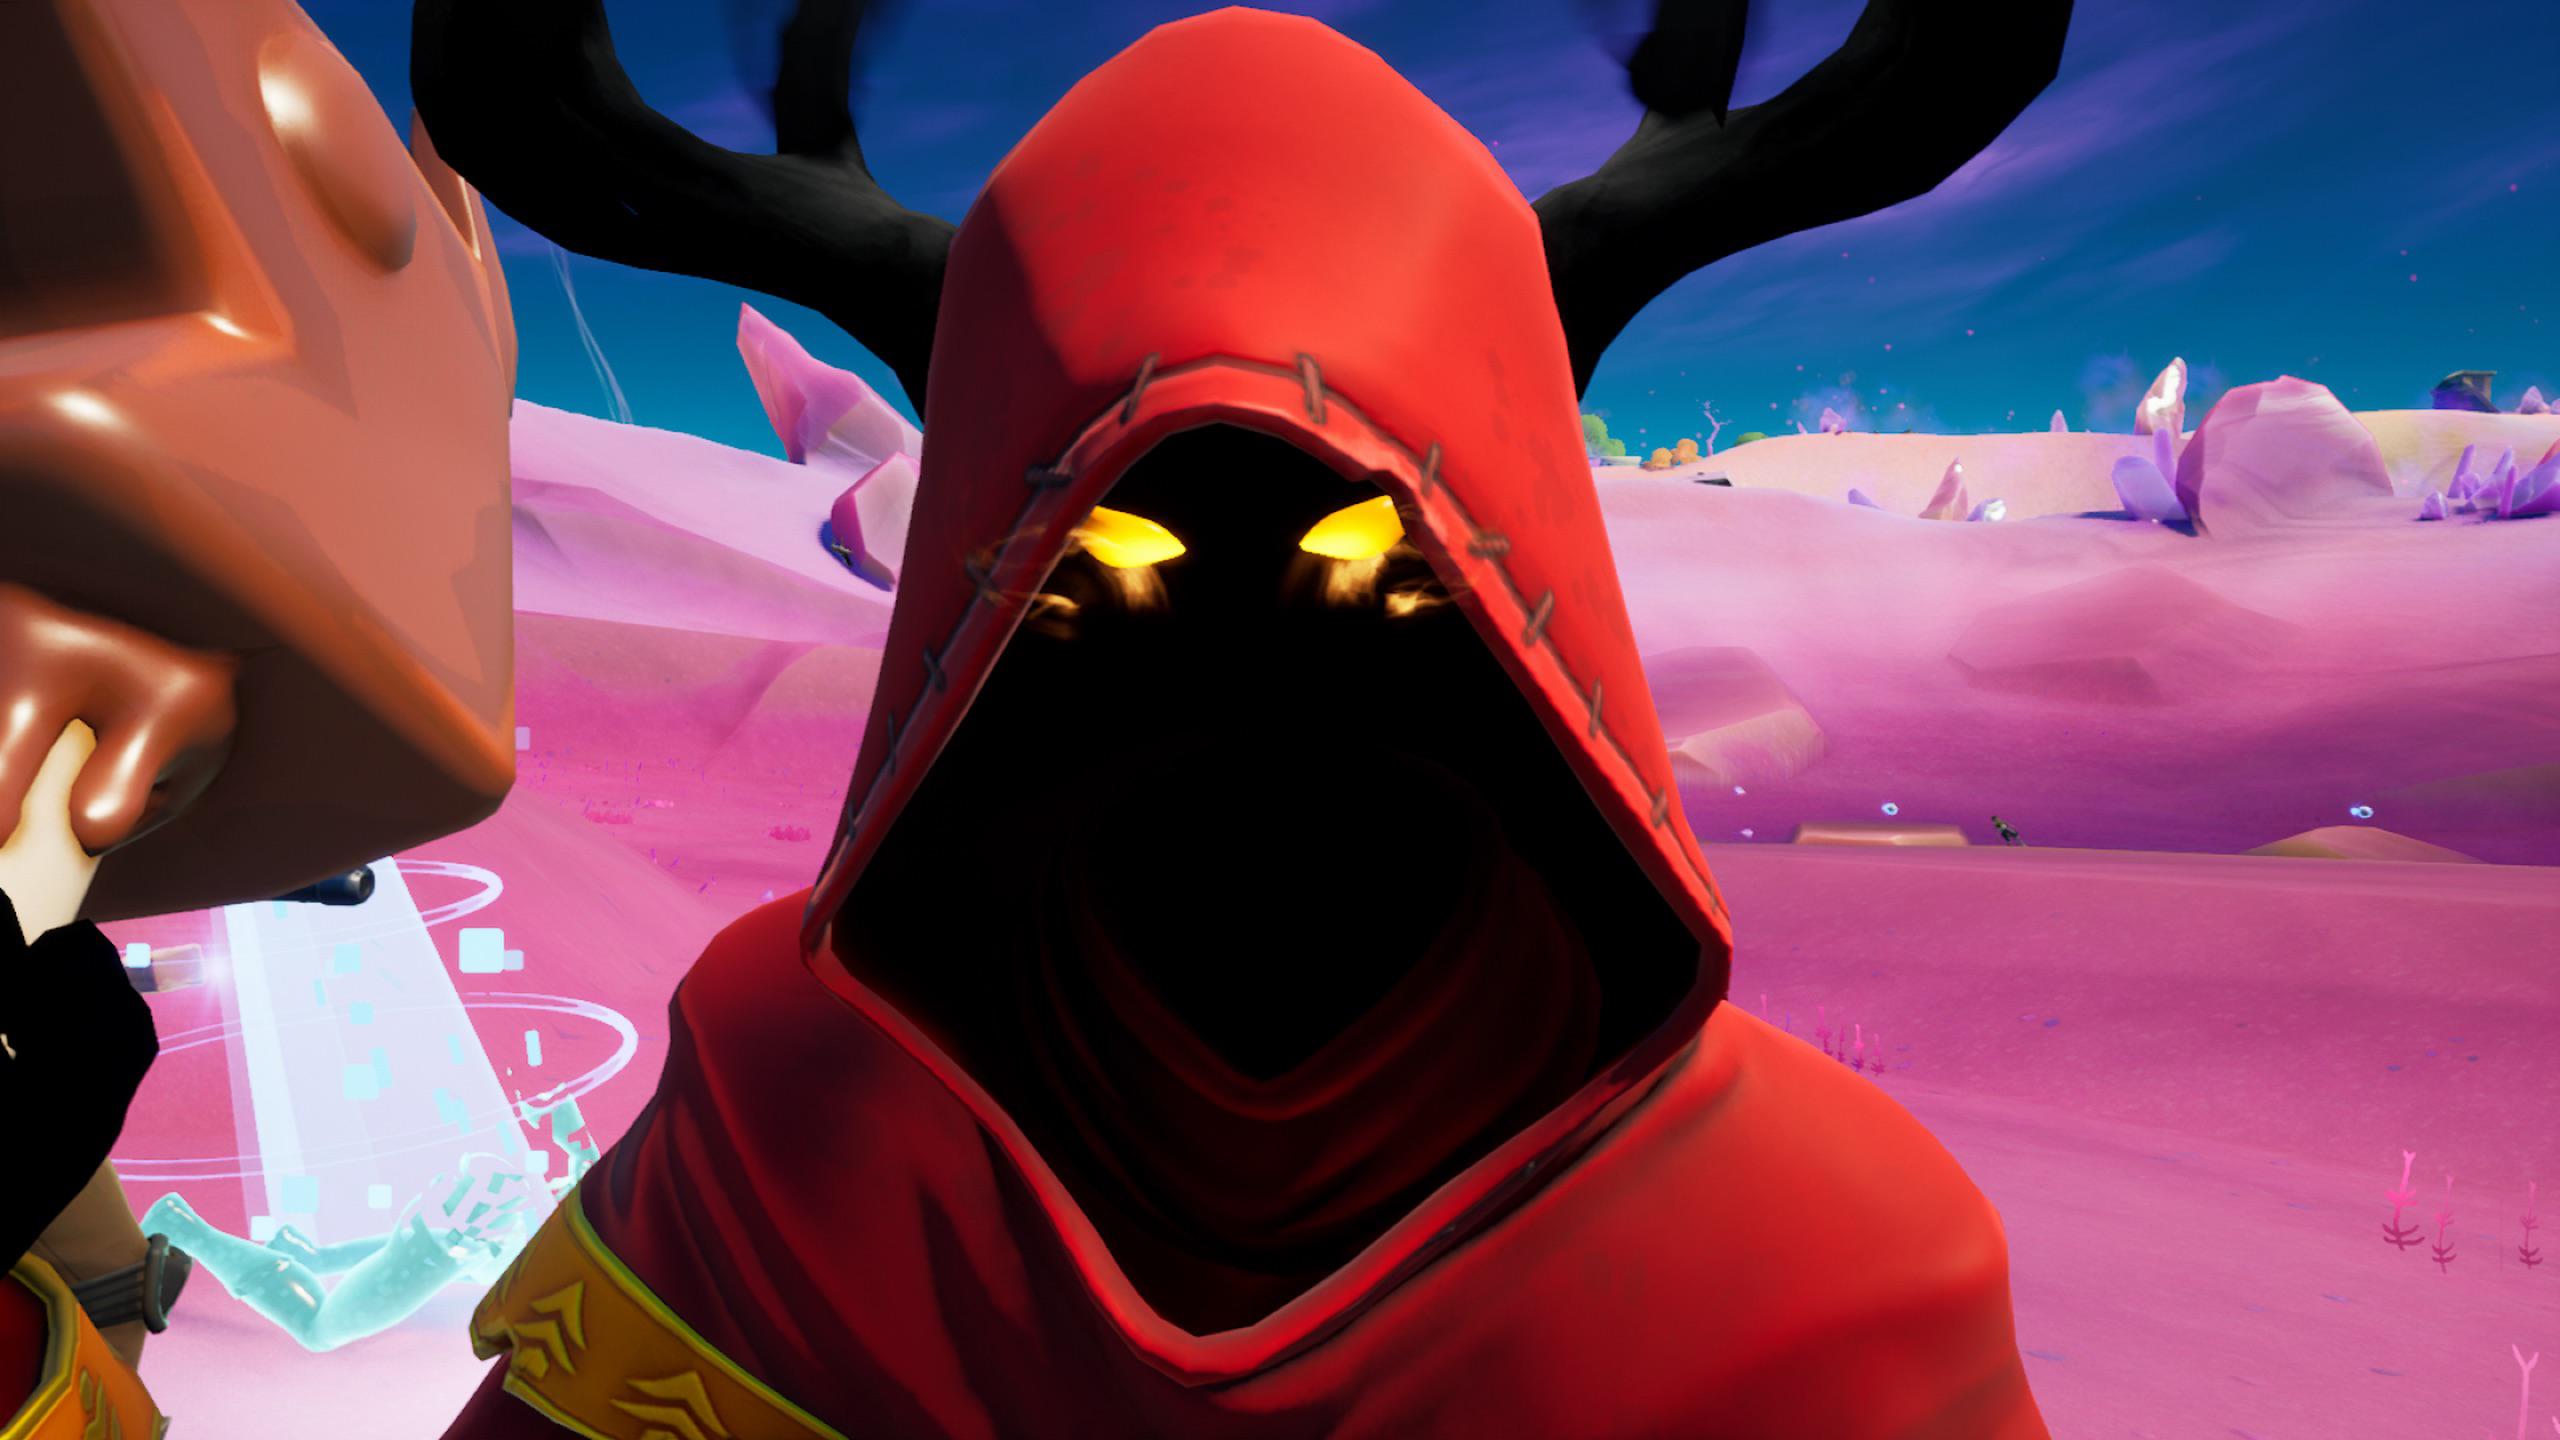 Cloaked Shadow Fortnite Wallpapers